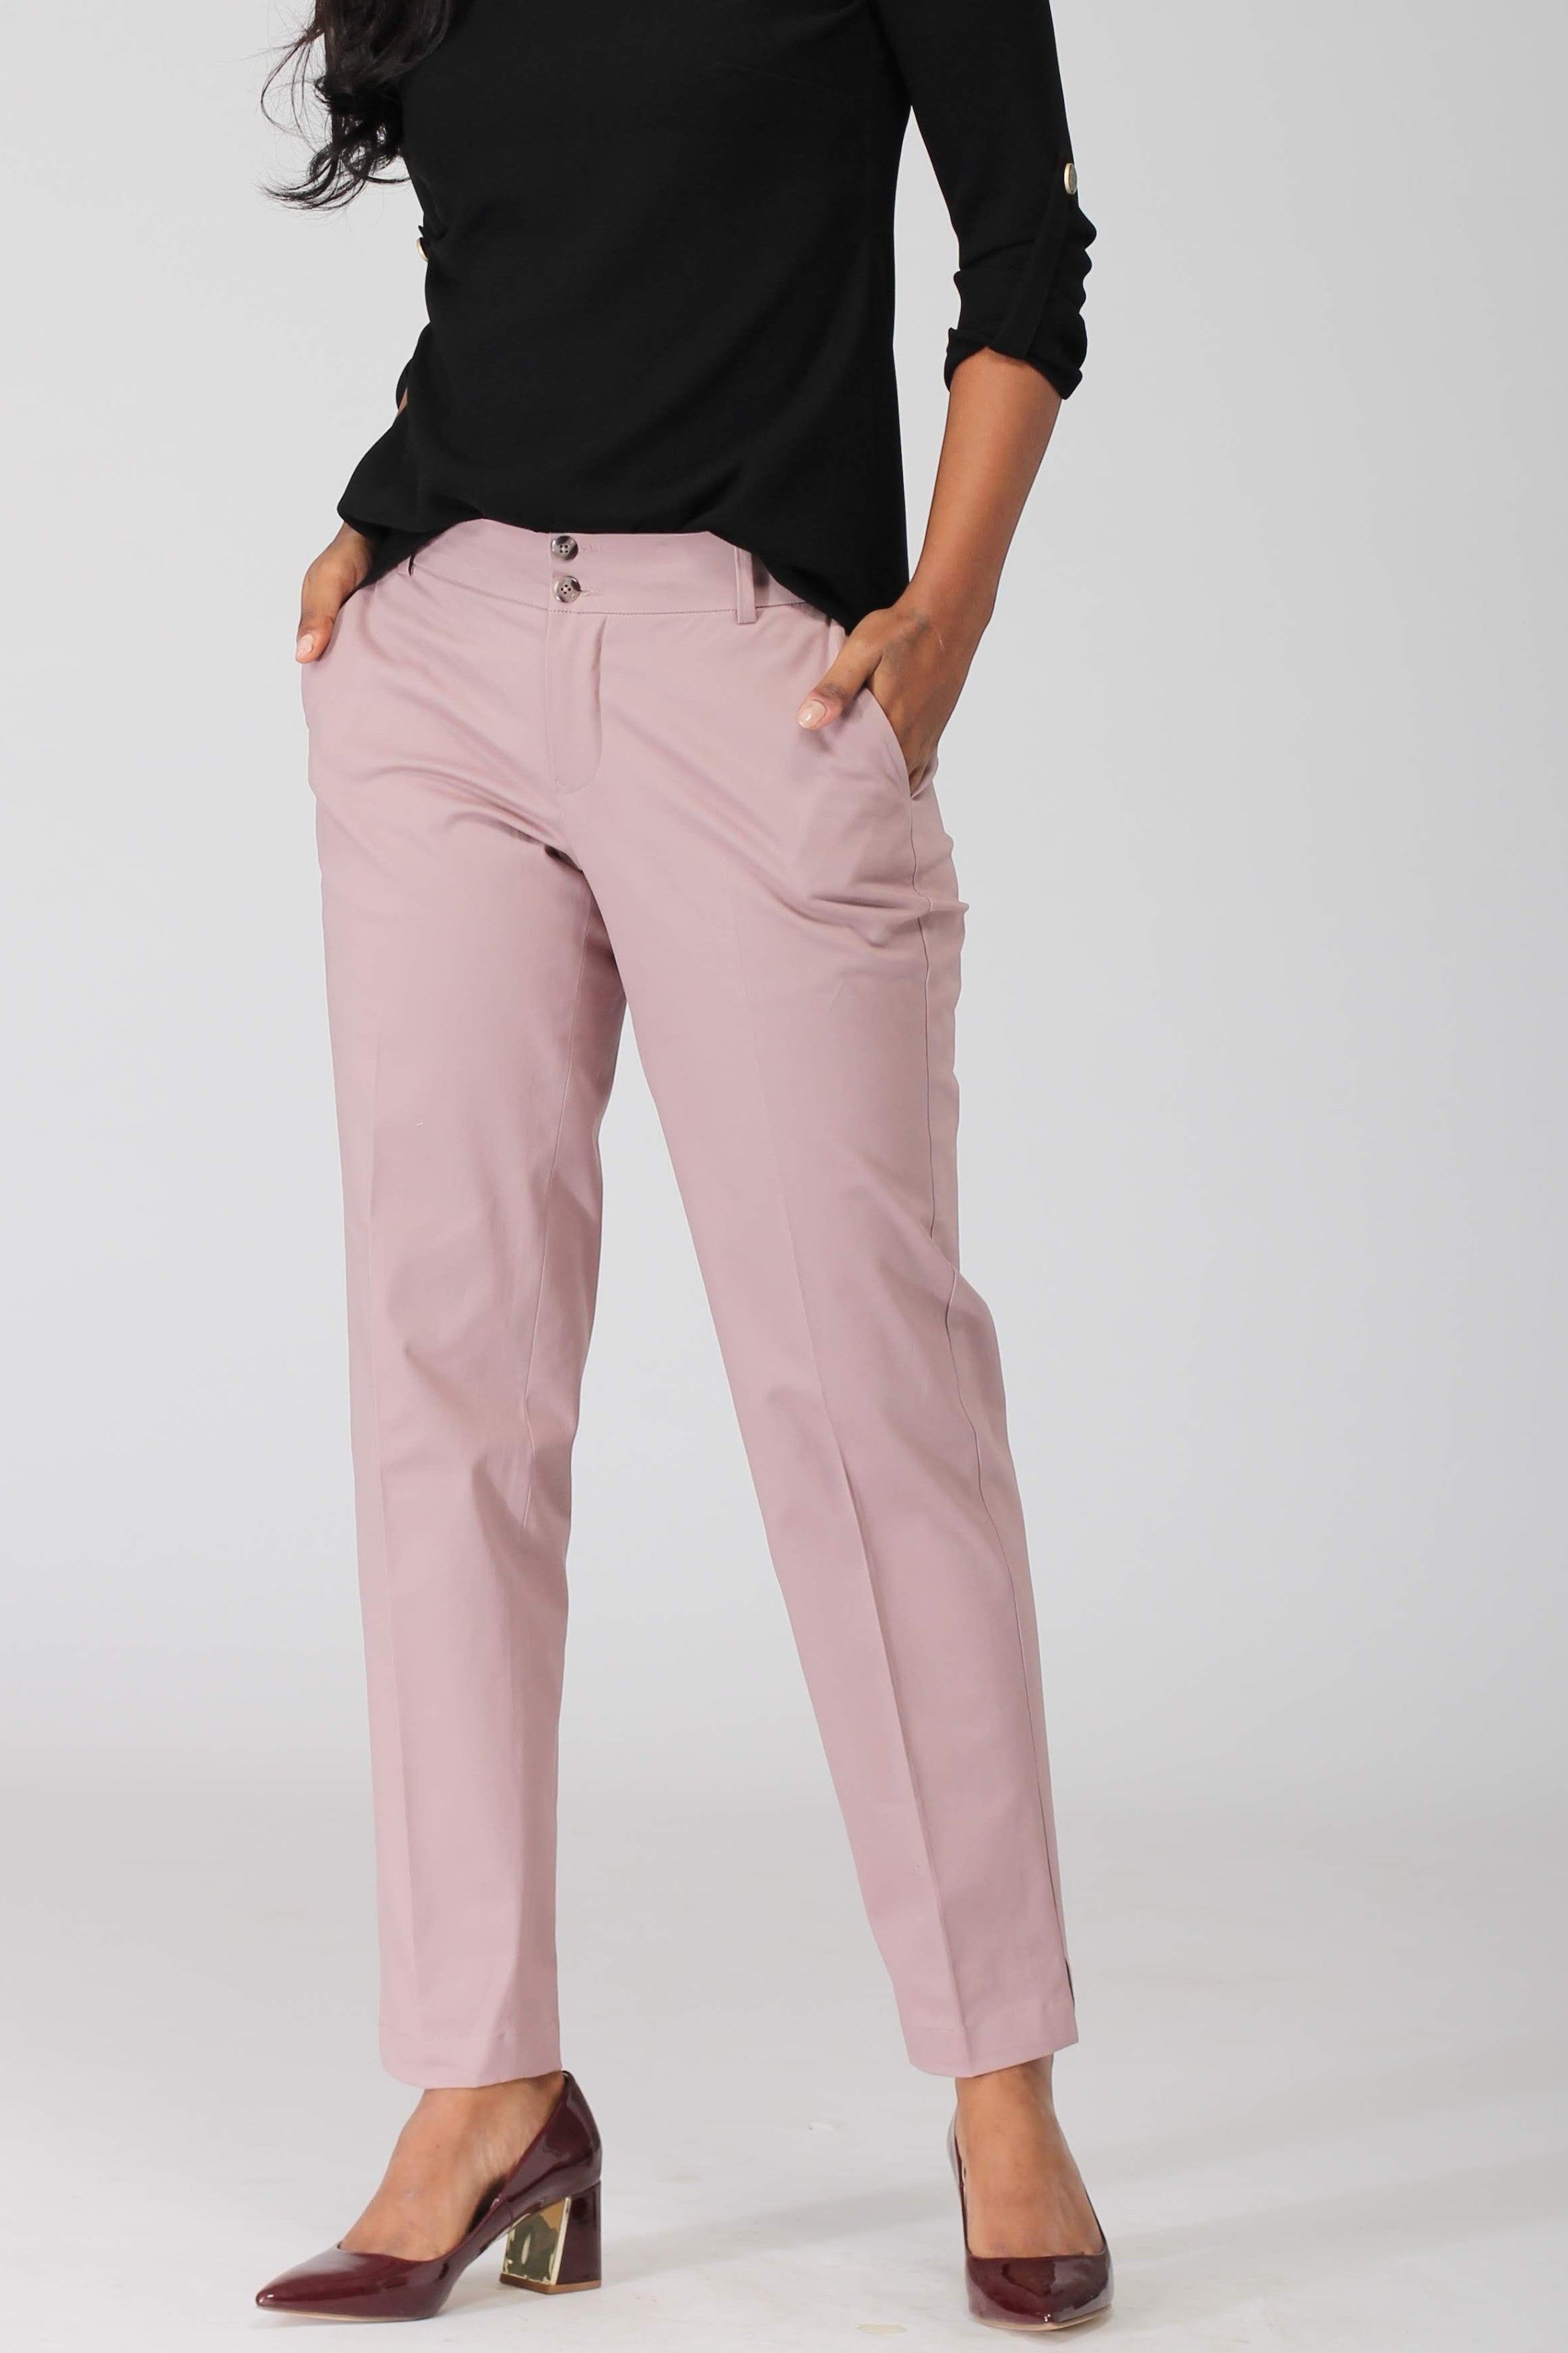 Outdoor Look Womens Milo Classic Casual Soft Chino Trousers | Outdoor Look